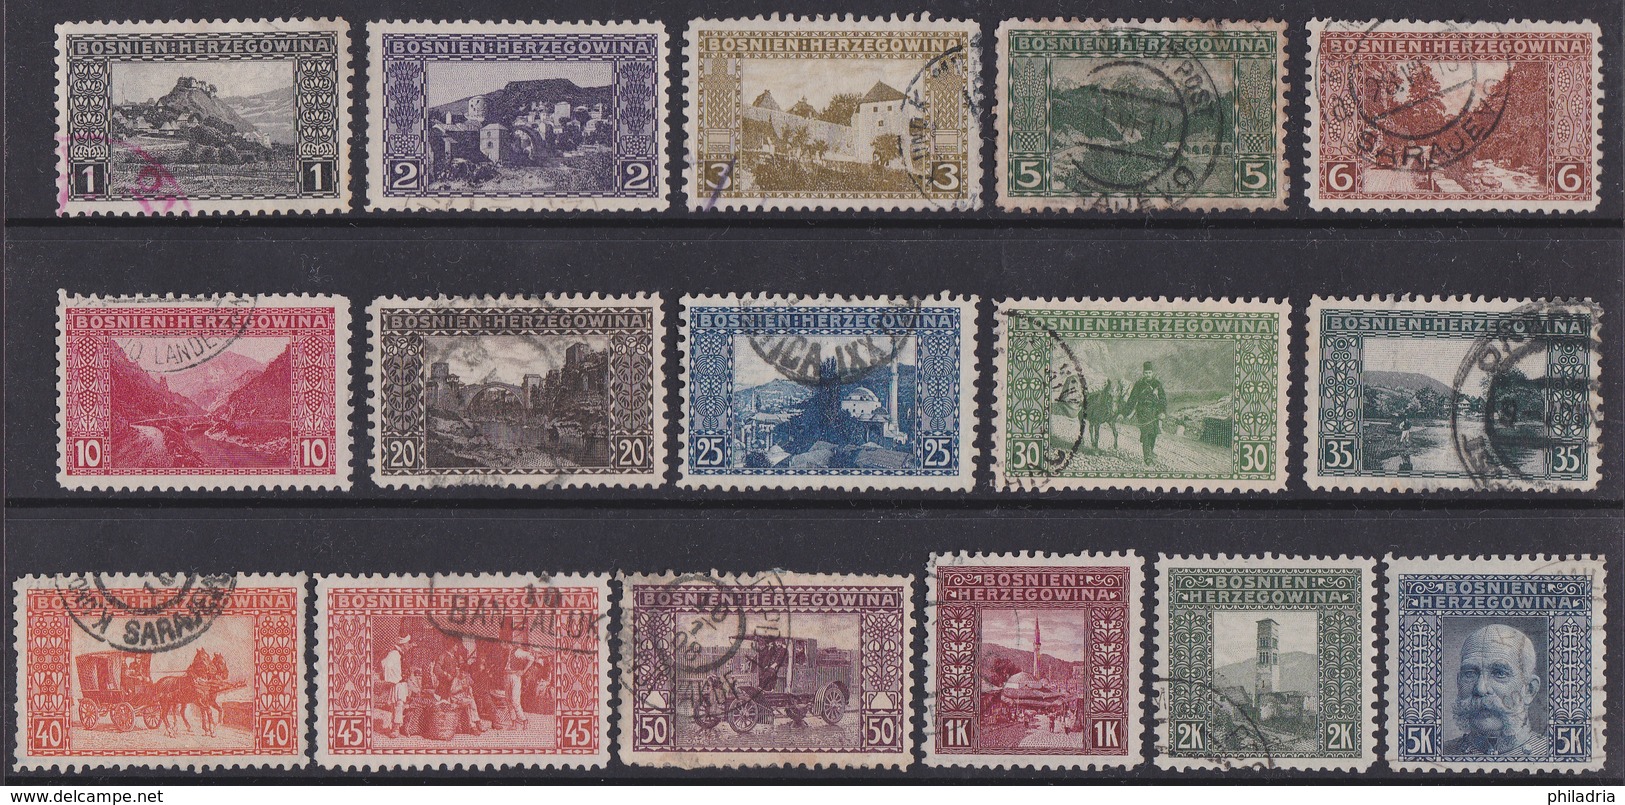 Bosnia, Landscapes, Complete Set, Used, Perforation 9 1/4, Few Stamps Some Shorter Perfs, See Picture - Bosnien-Herzegowina